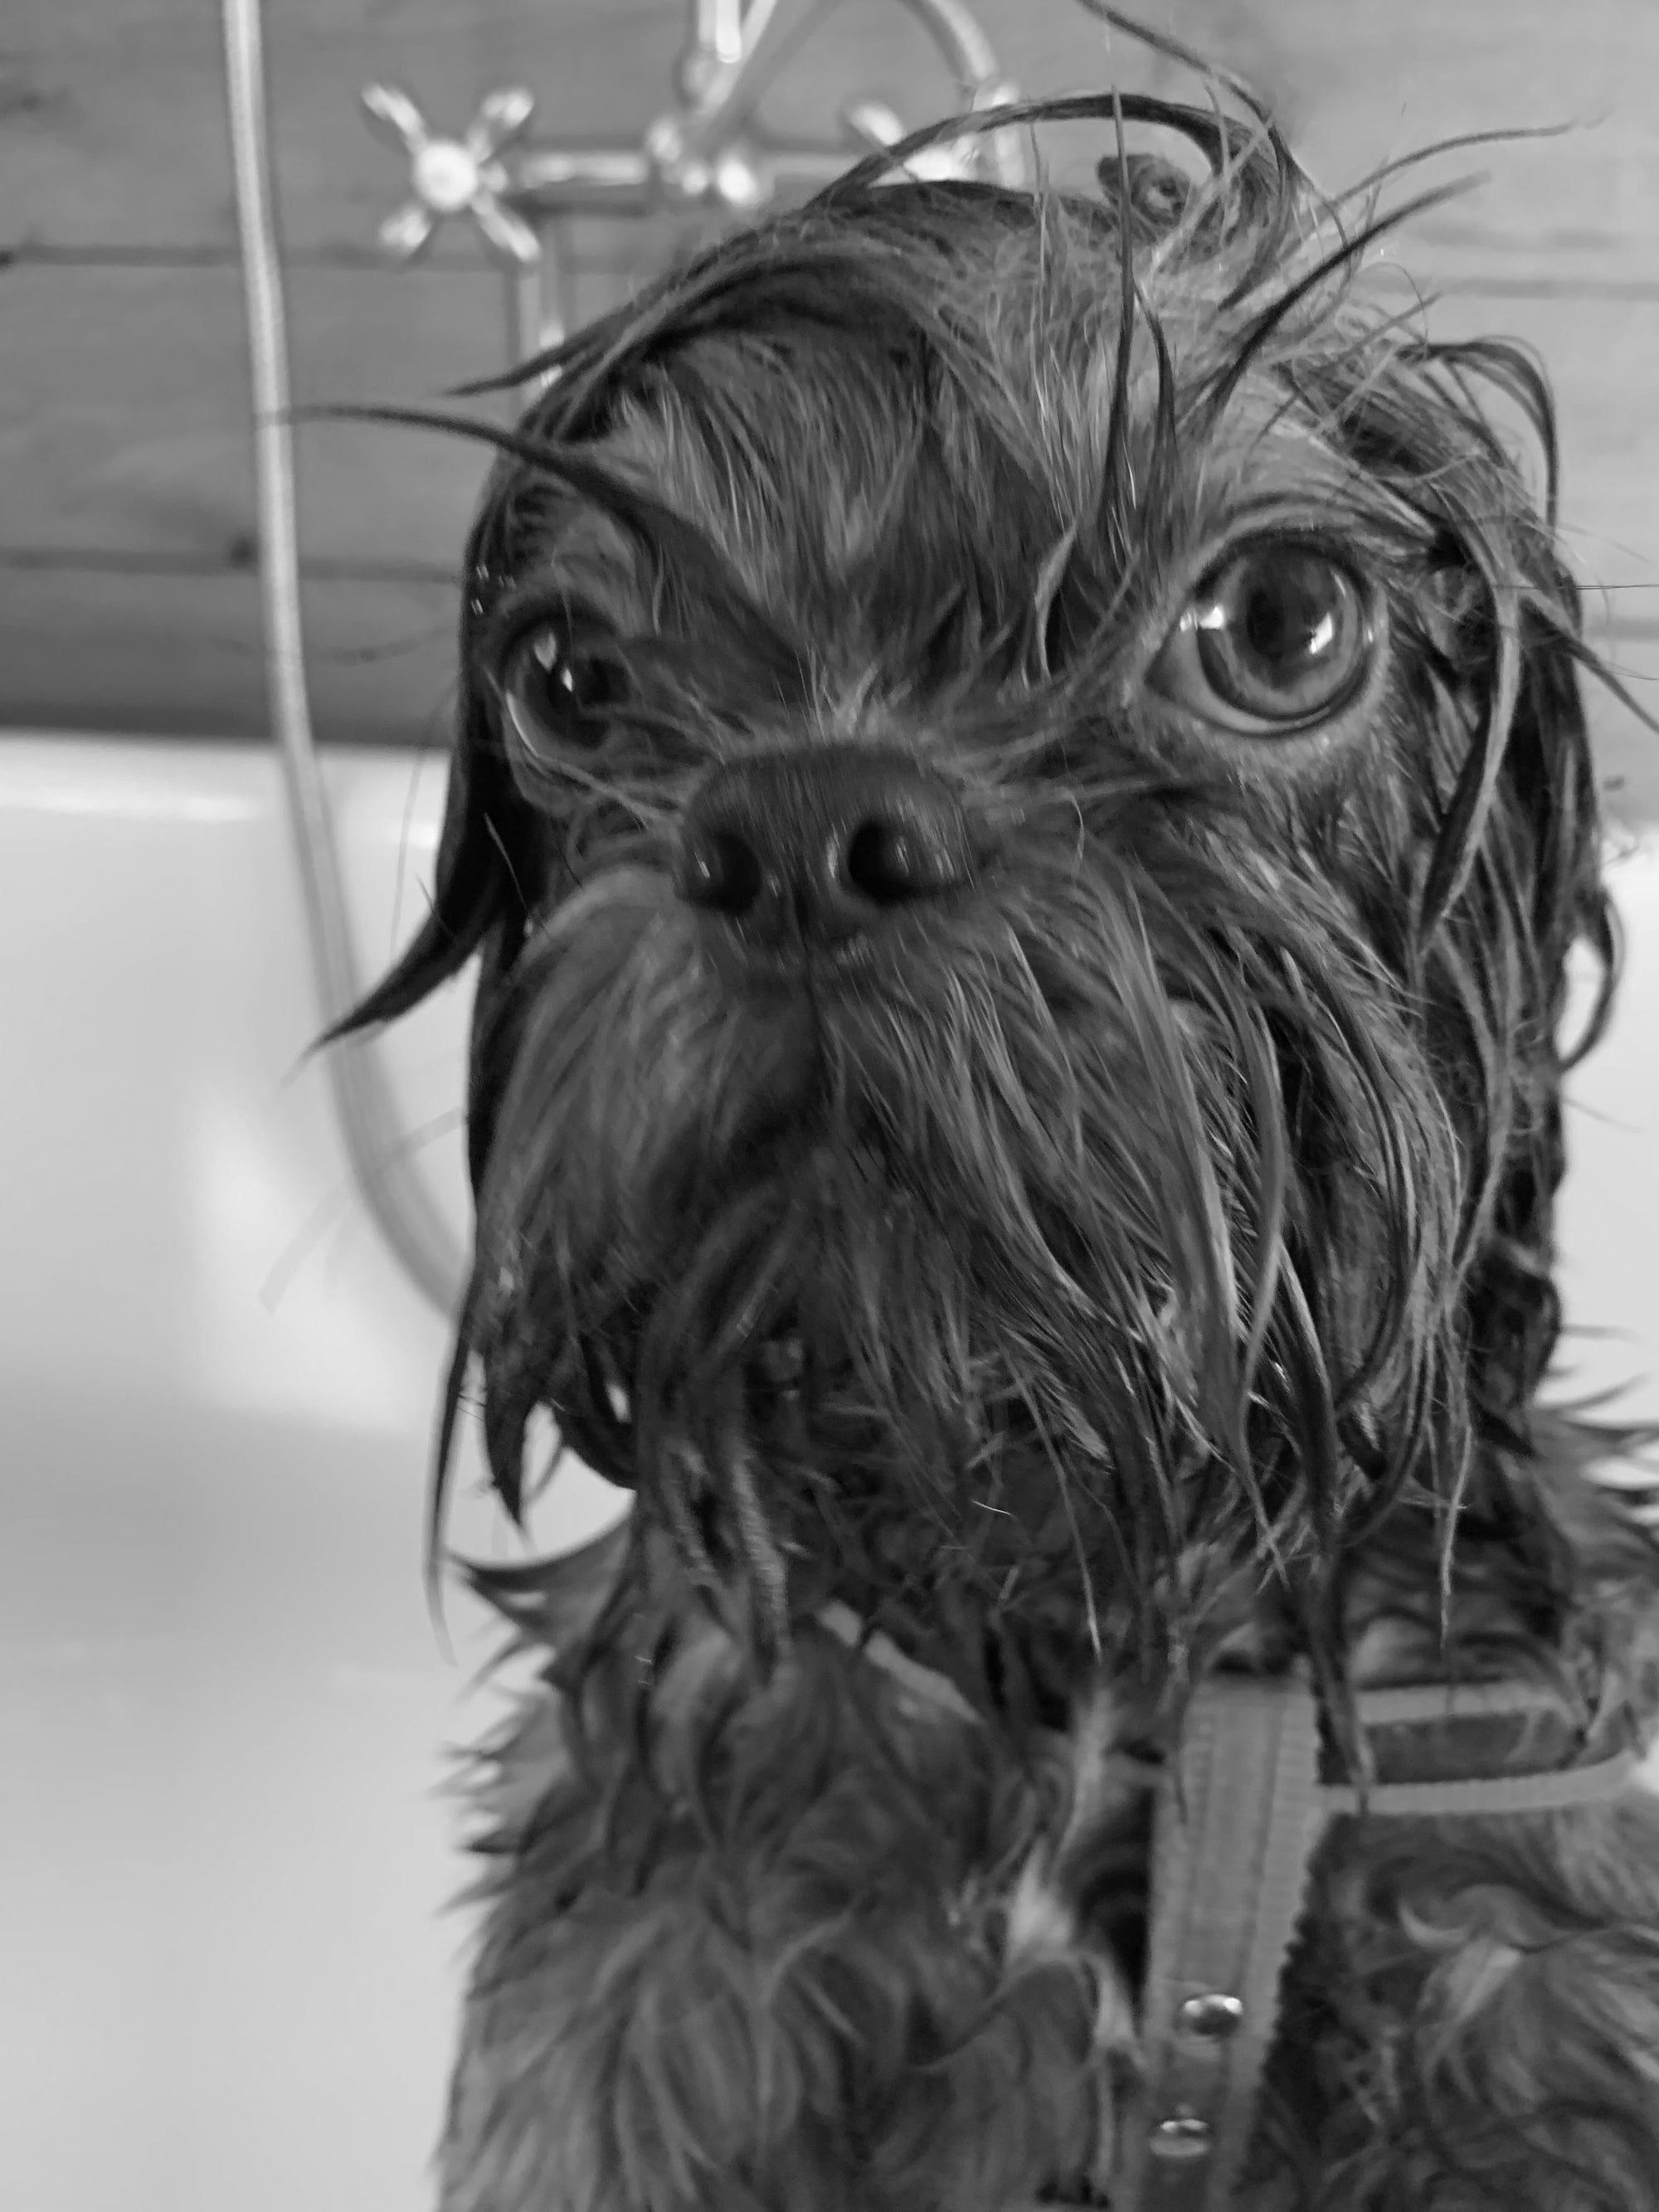 Can I Use Dish Detergent To Wash My Dog?